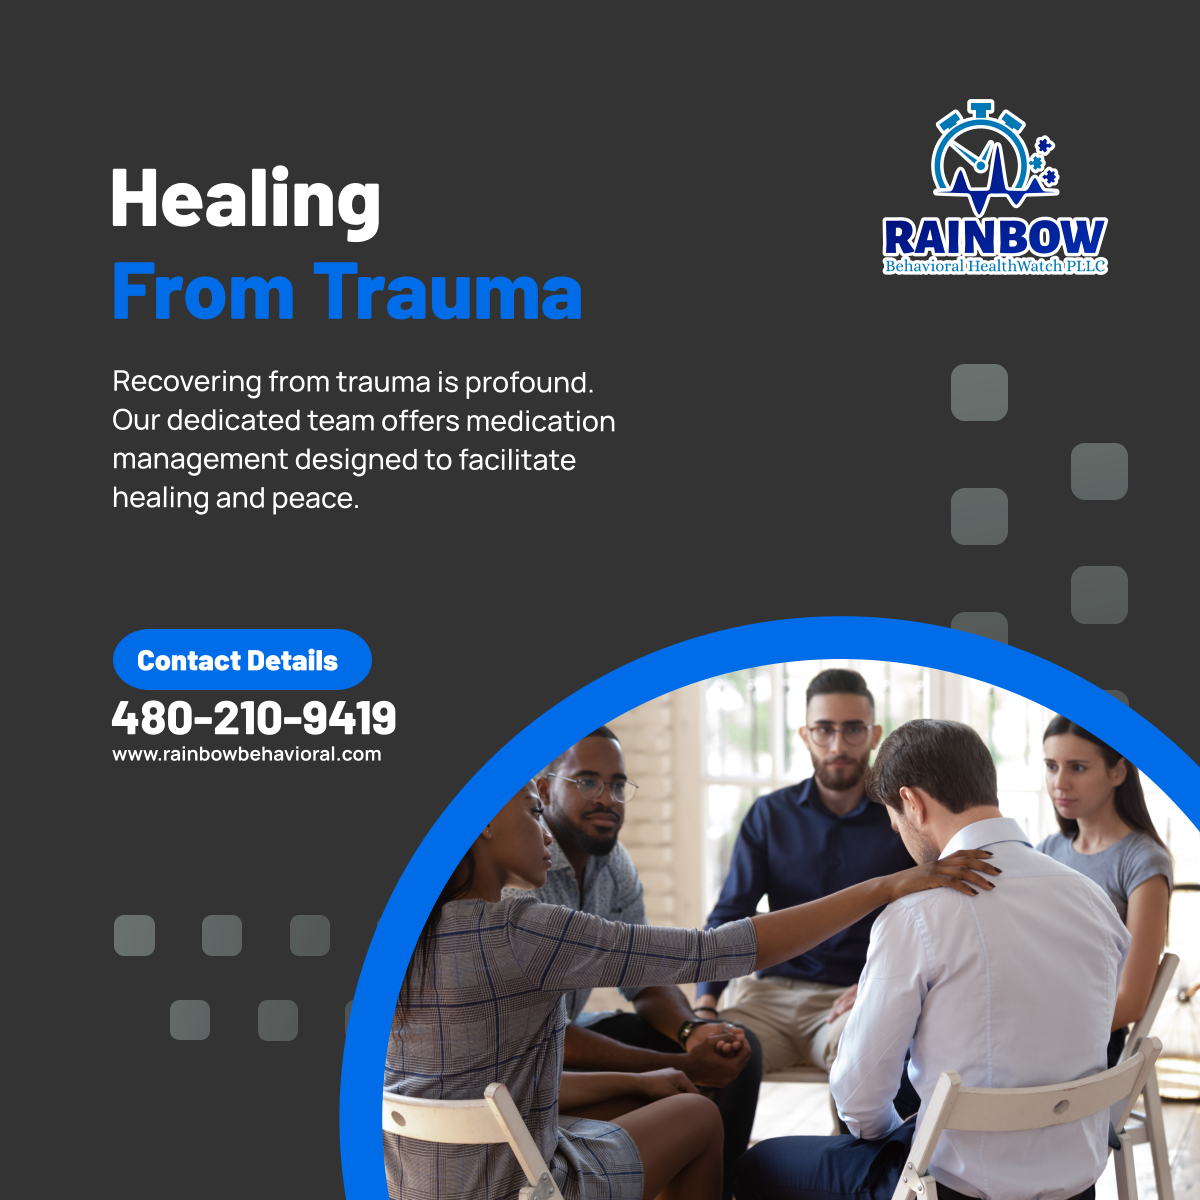 Your courage in facing trauma is commendable. Reach out to begin reclaiming your well-being and future.

#OroValleyAZ #PsychiatricTelehealthServices #TraumaRecovery #HealingJourney #MentalHealthCare